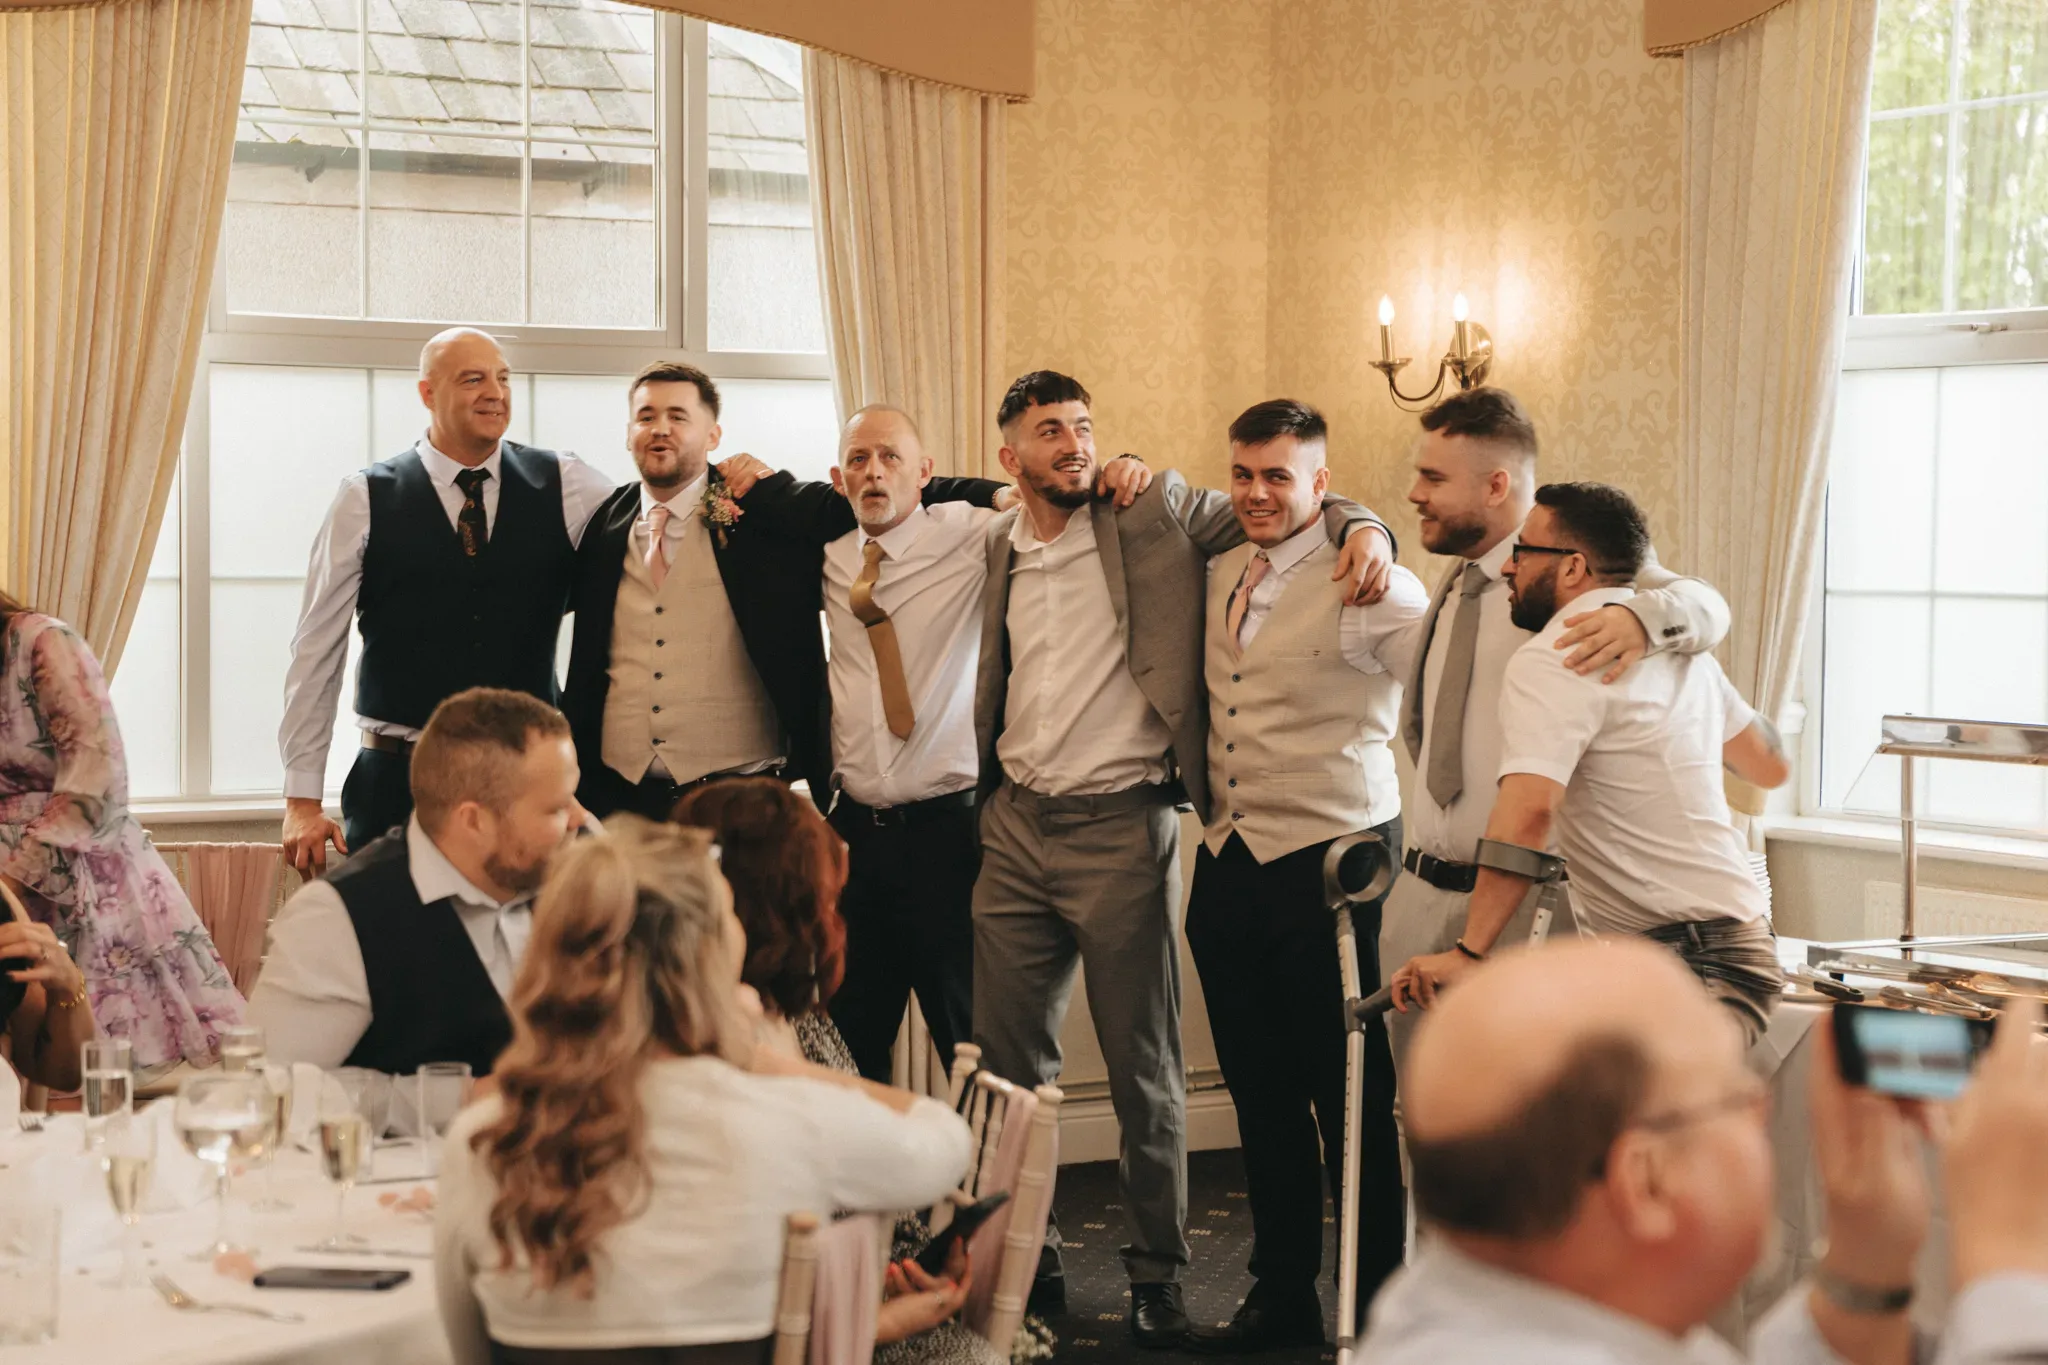 A group of six men embracing and posing happily together at a wedding reception. they are dressed in formal attire, with the room filled with seated guests. the decor includes elegant cream wallpaper and chandeliers.